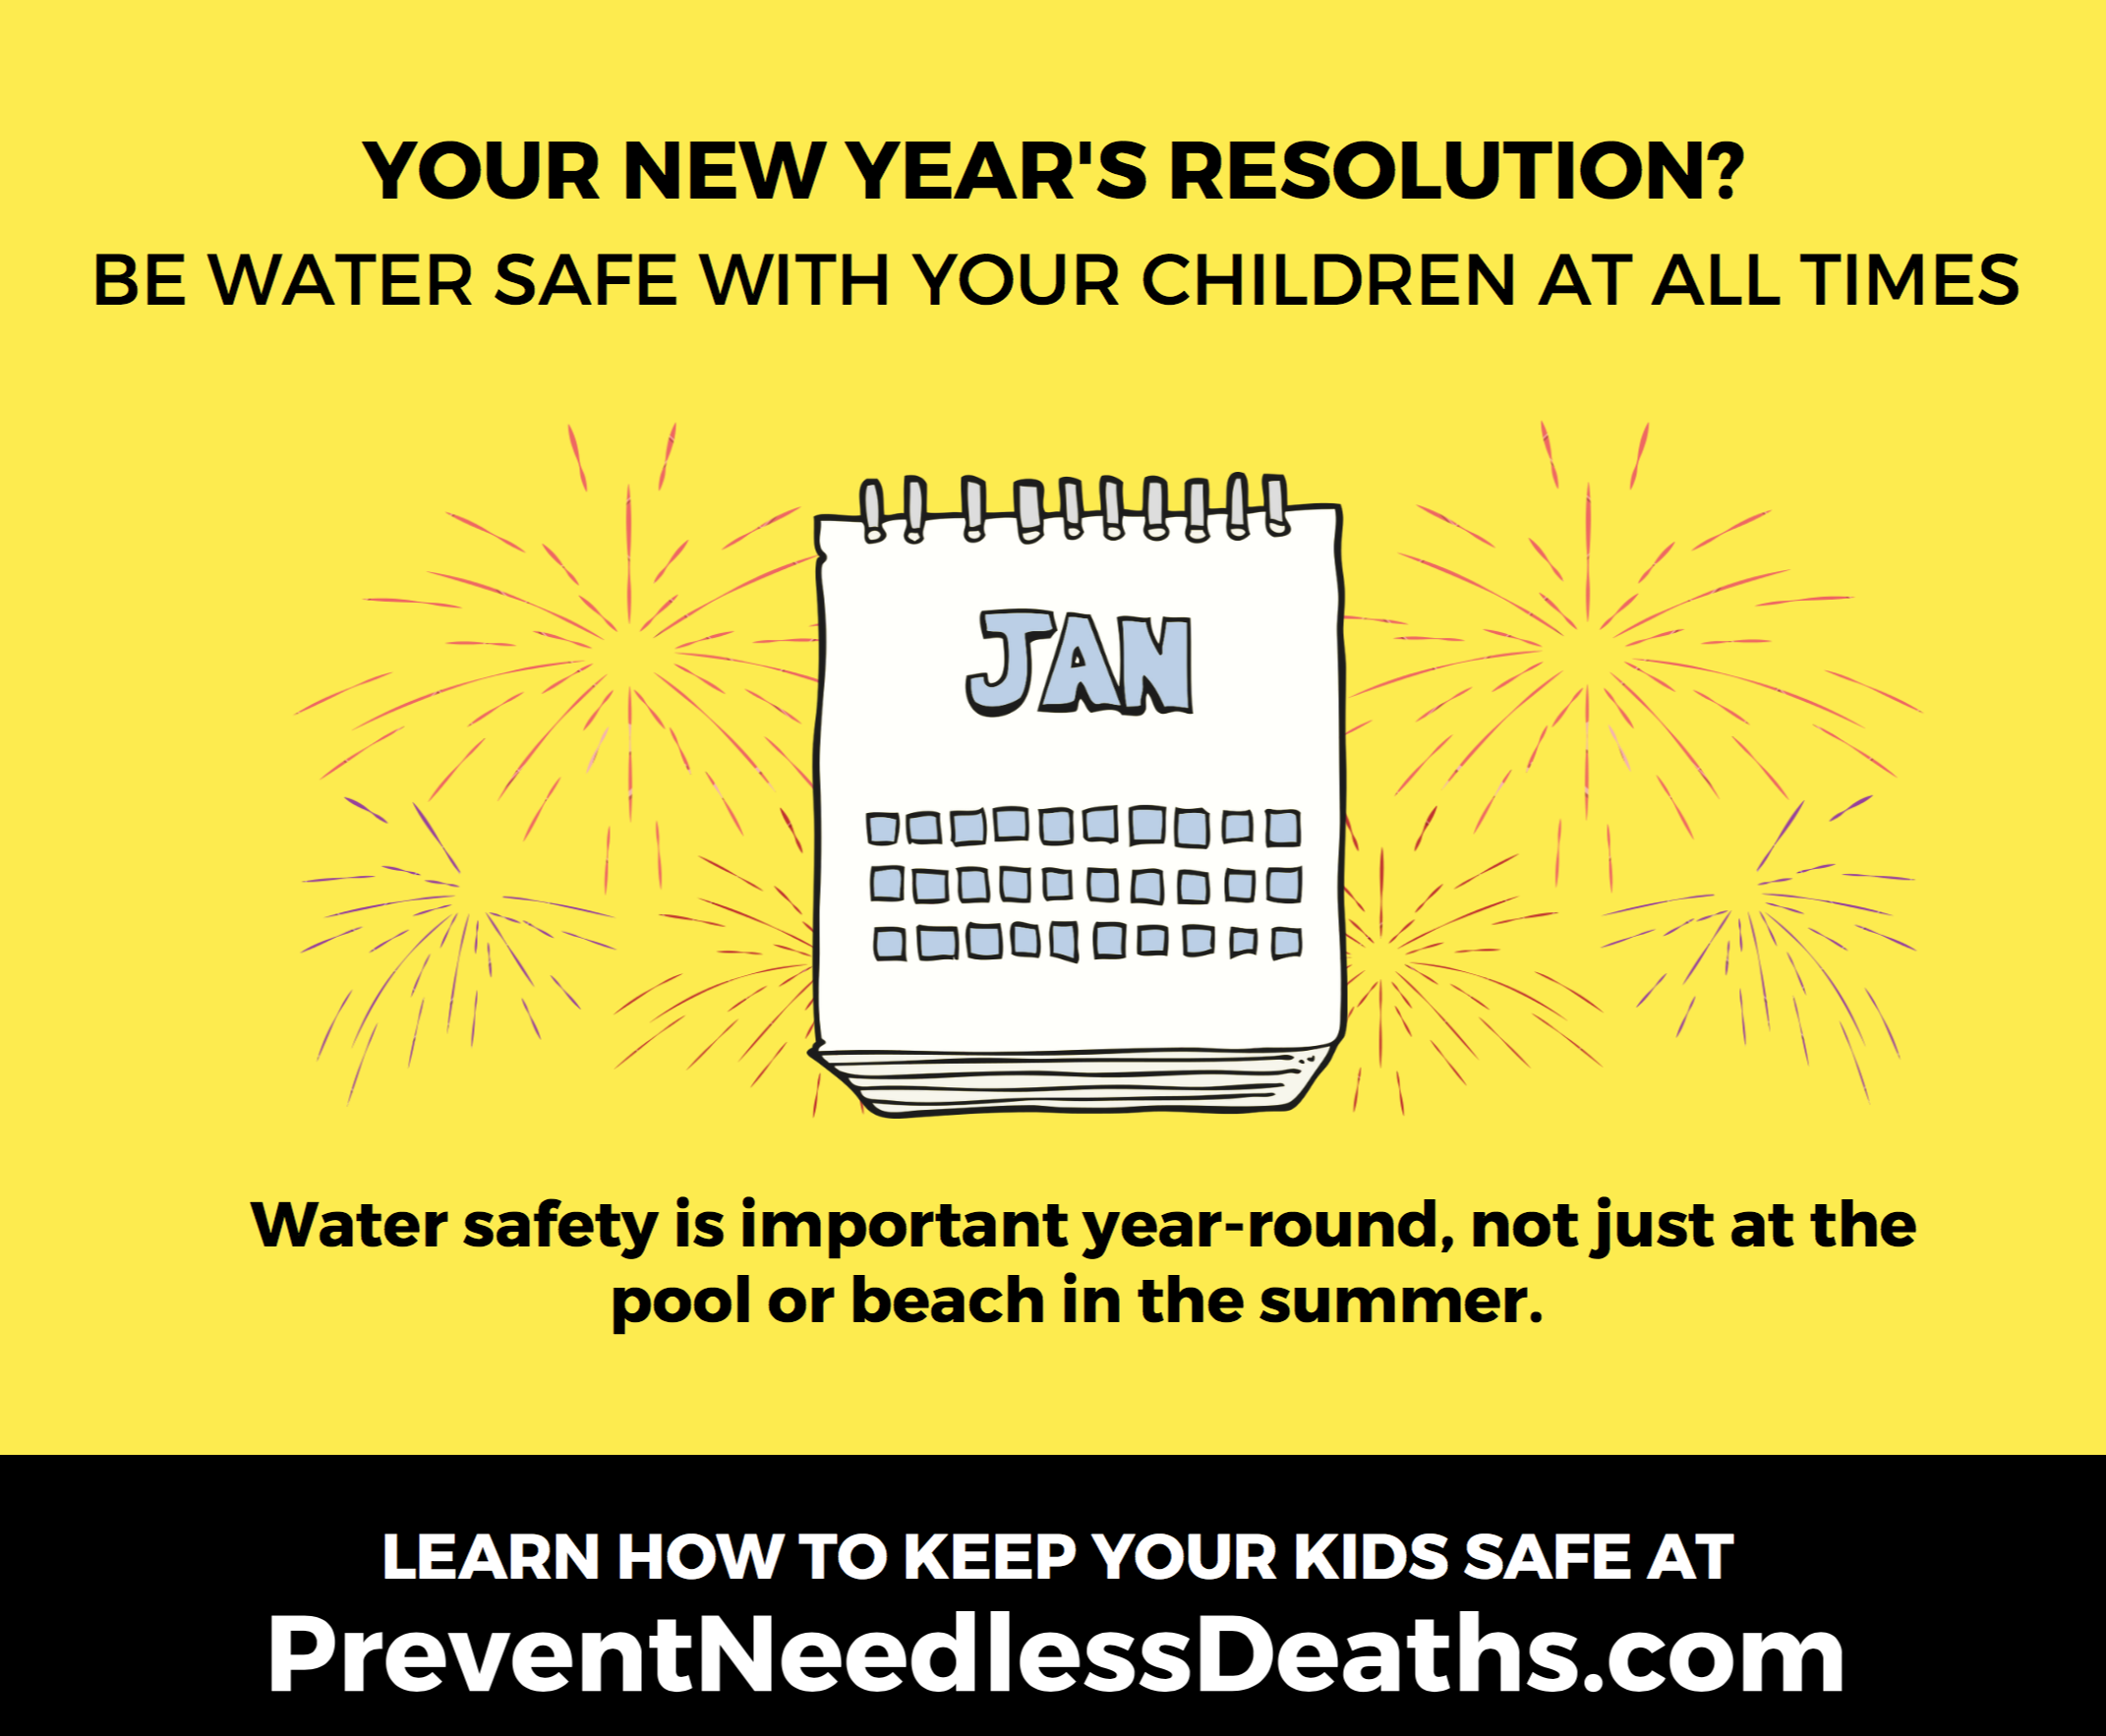 be water safe with your children at all times